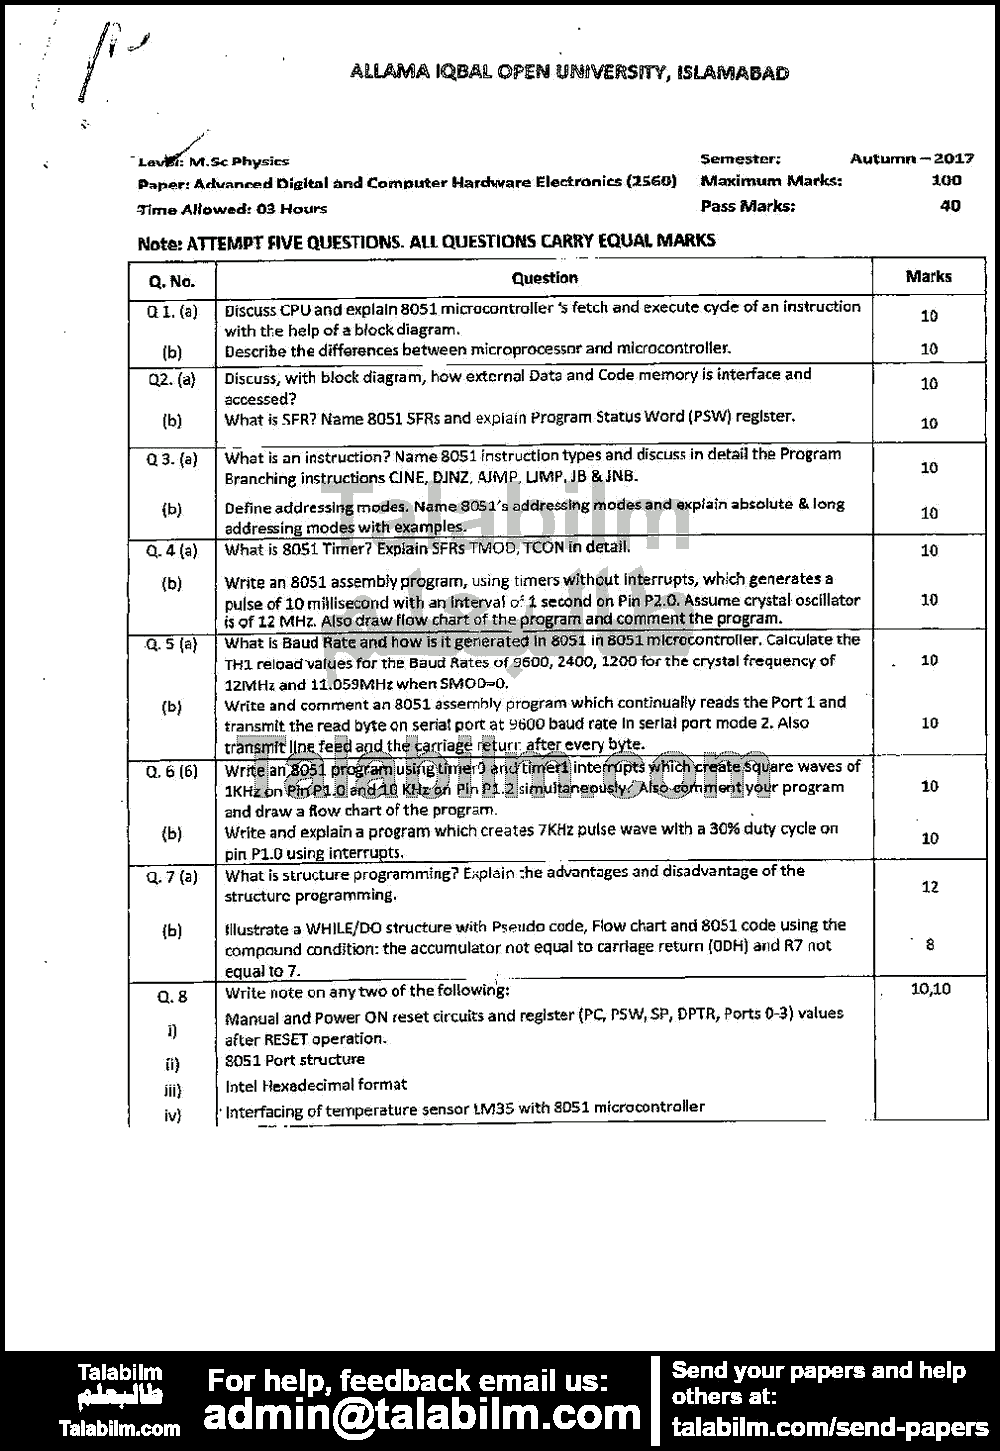 Advanced Digital & Computer Hardware Electronics 2560 past paper for Autumn 2017